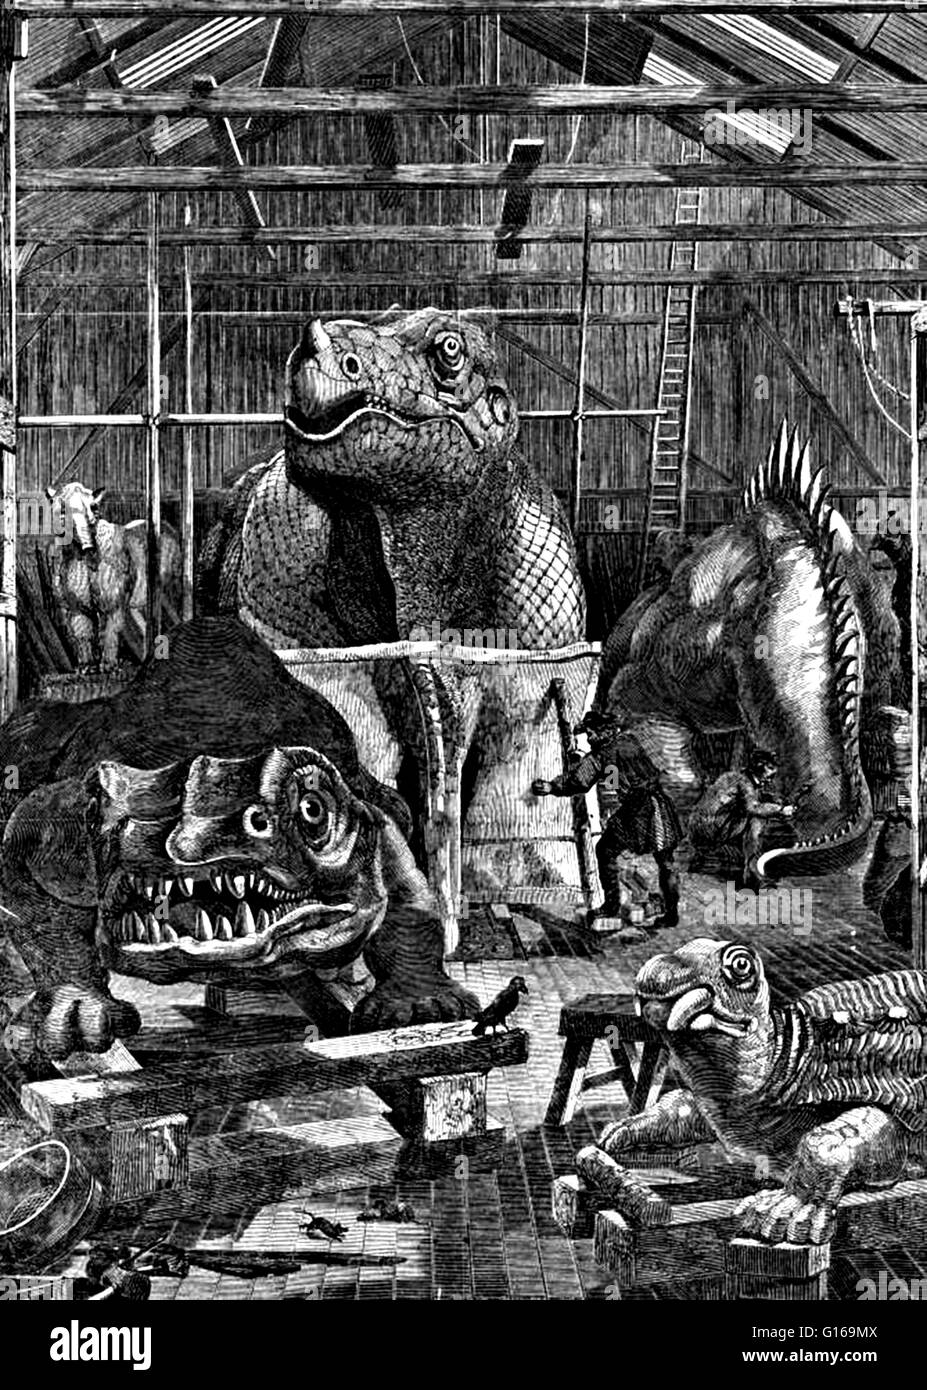 Illustration of Hawkins' studio in Sydenham, where he made the Crystal Palace Dinosaurs. Benjamin Waterhouse Hawkins (February 8, 1807 - January 27, 1894) was an English sculptor and natural history artist. He was appointed assistant superintendent of the Great Exhibition of 1851 in London. The following year (1852), he was appointed by the Crystal Palace company to create 33 life-size concrete models of extinct dinosaurs to be placed in the south London park to which the great glass exhibition hall was to be relocated. In this work, which took some three years, he collaborated with Richard Ow Stock Photo